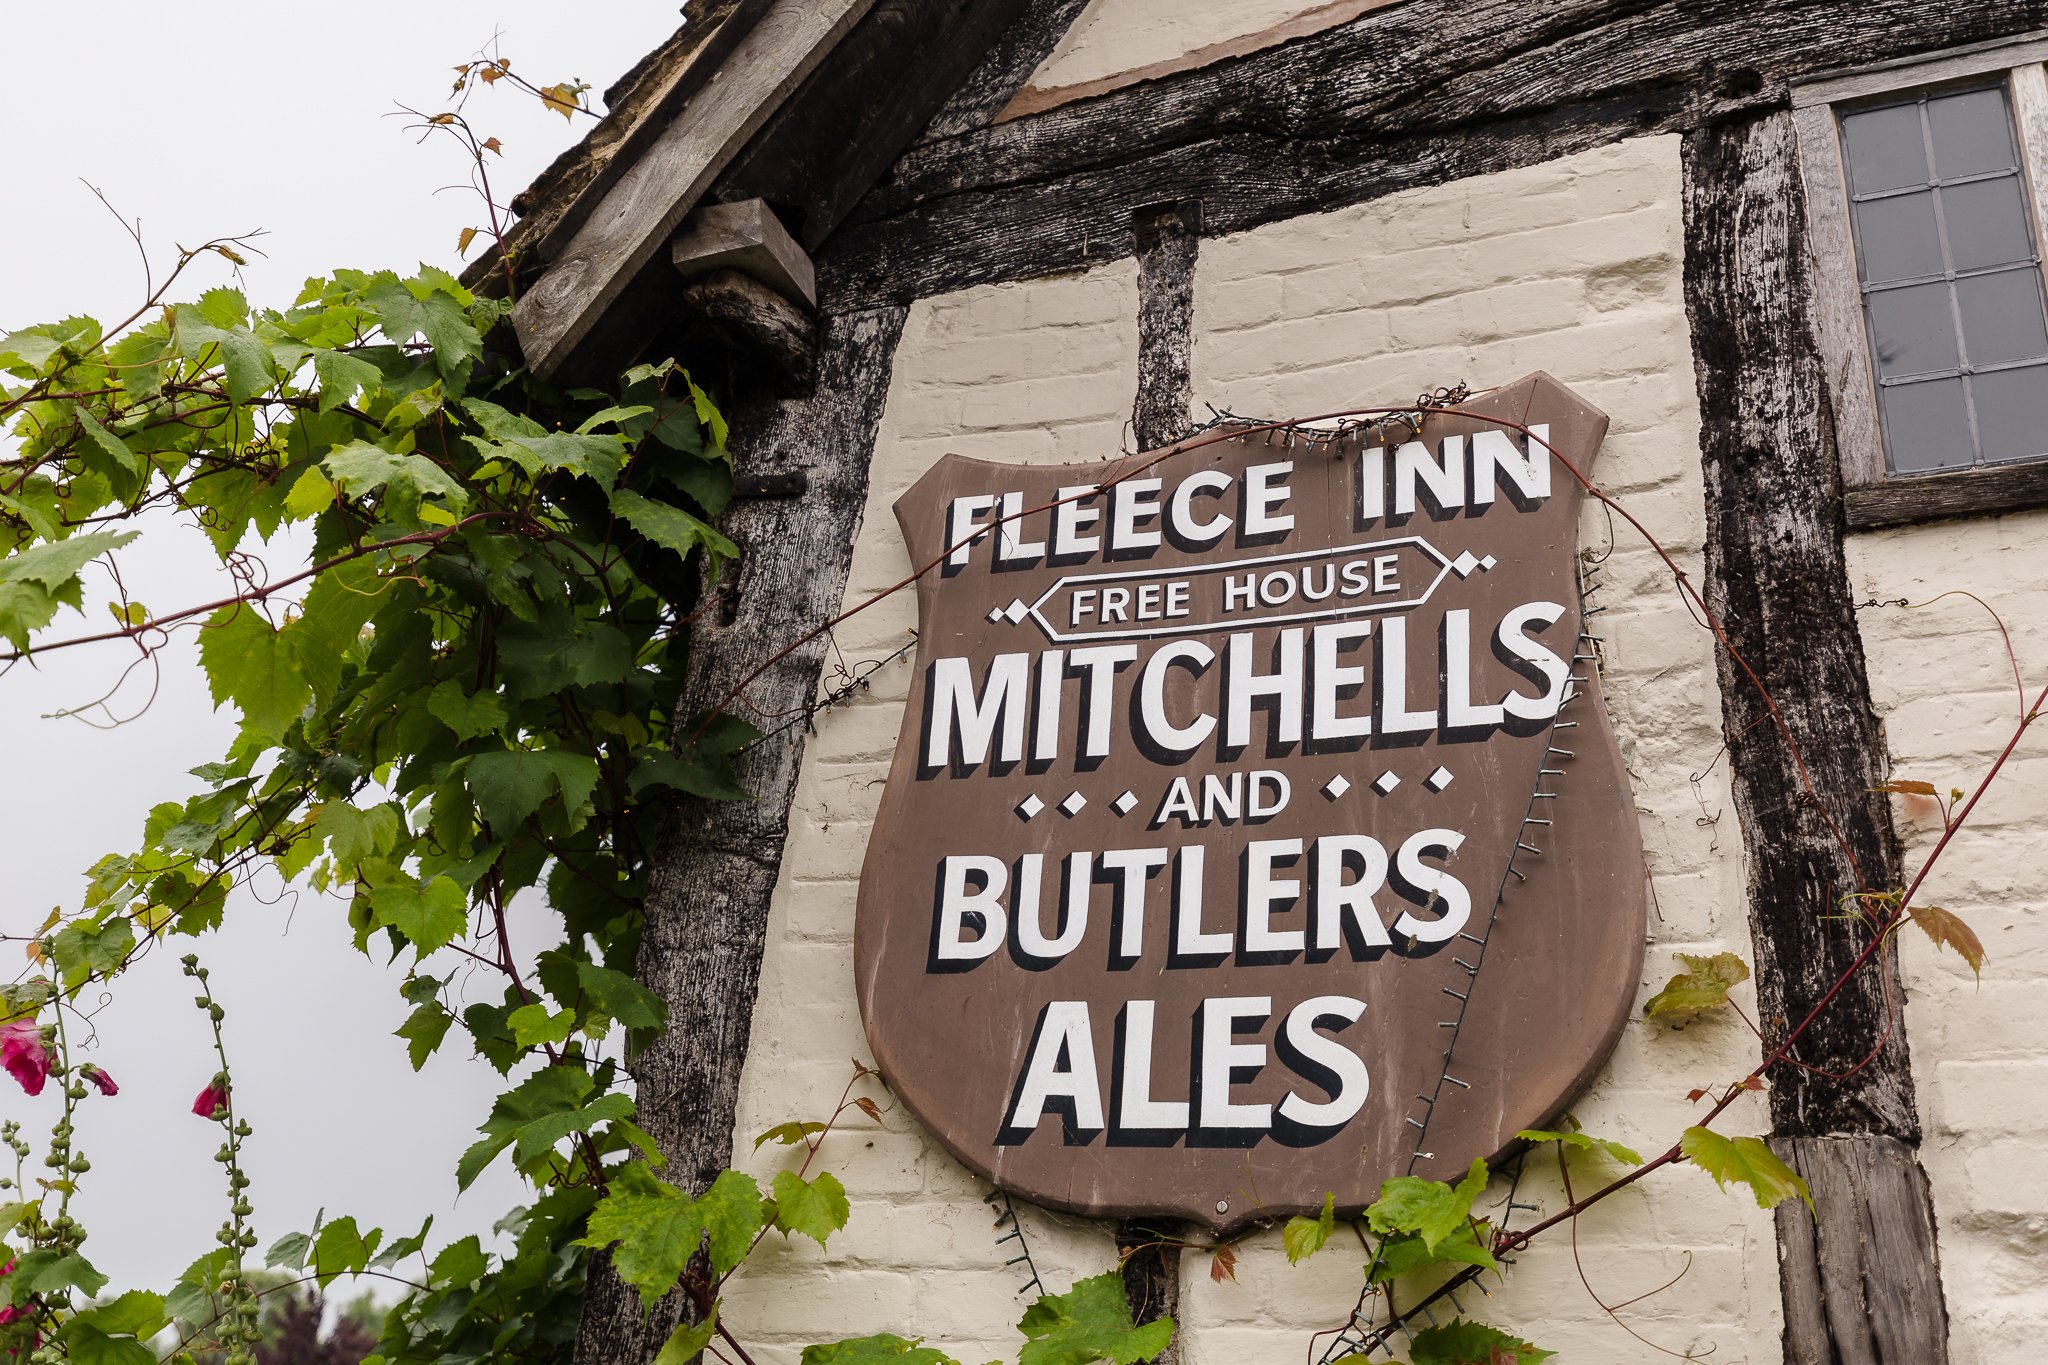 Top Ten Tips for a Magical Worcestershire Wedding at The Fleece Inn